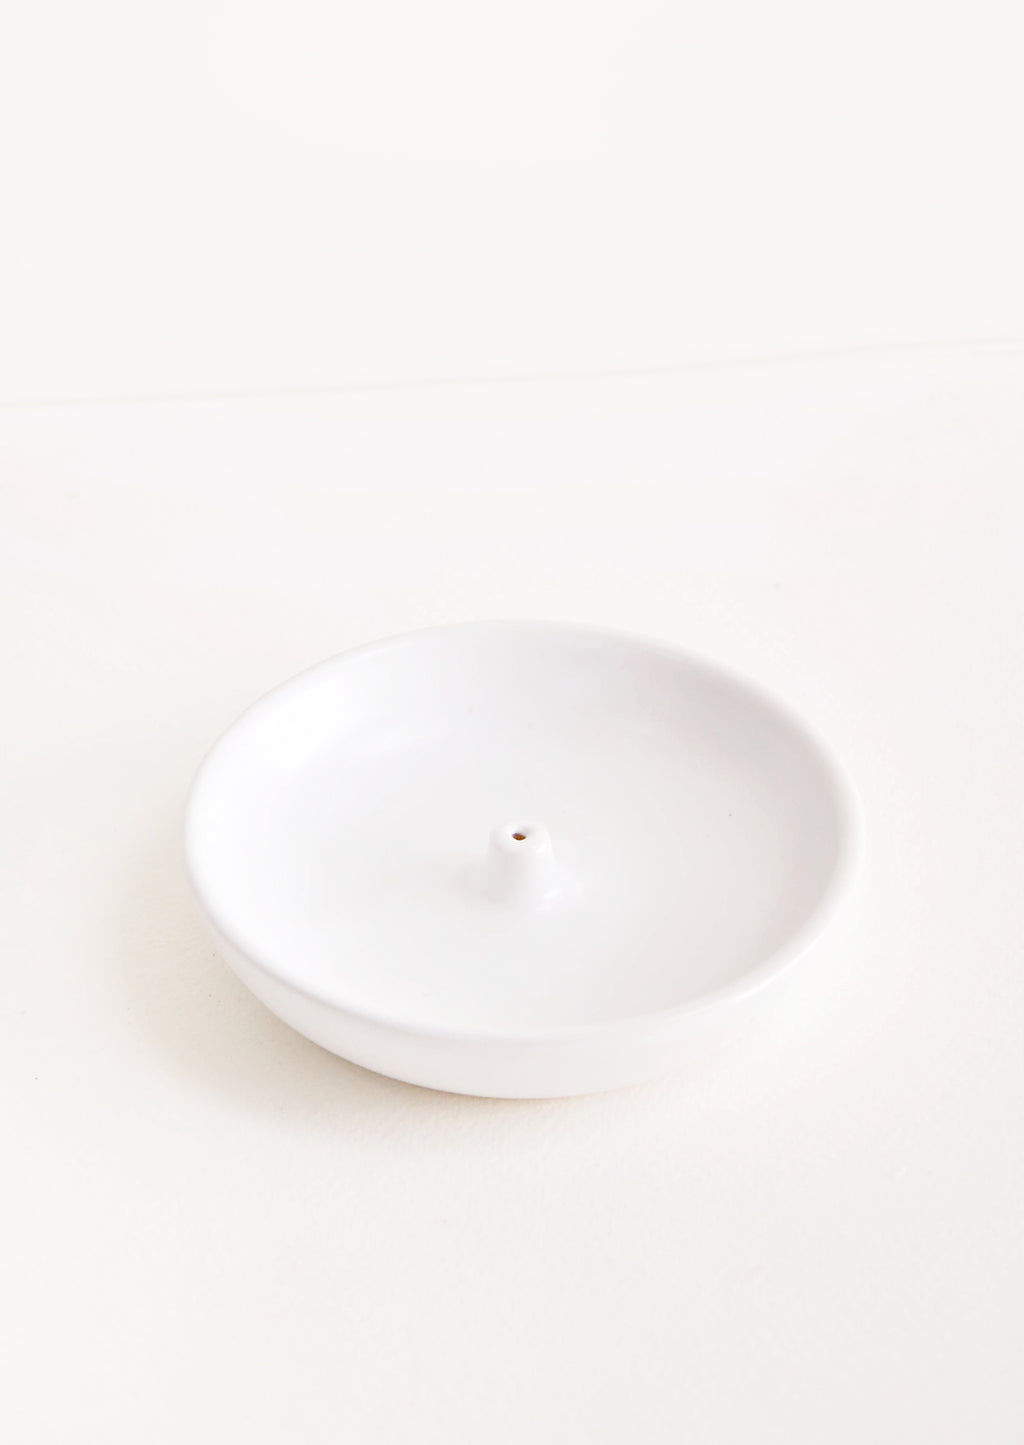 2: A simple white dish with a small hold at the center for holding incense.